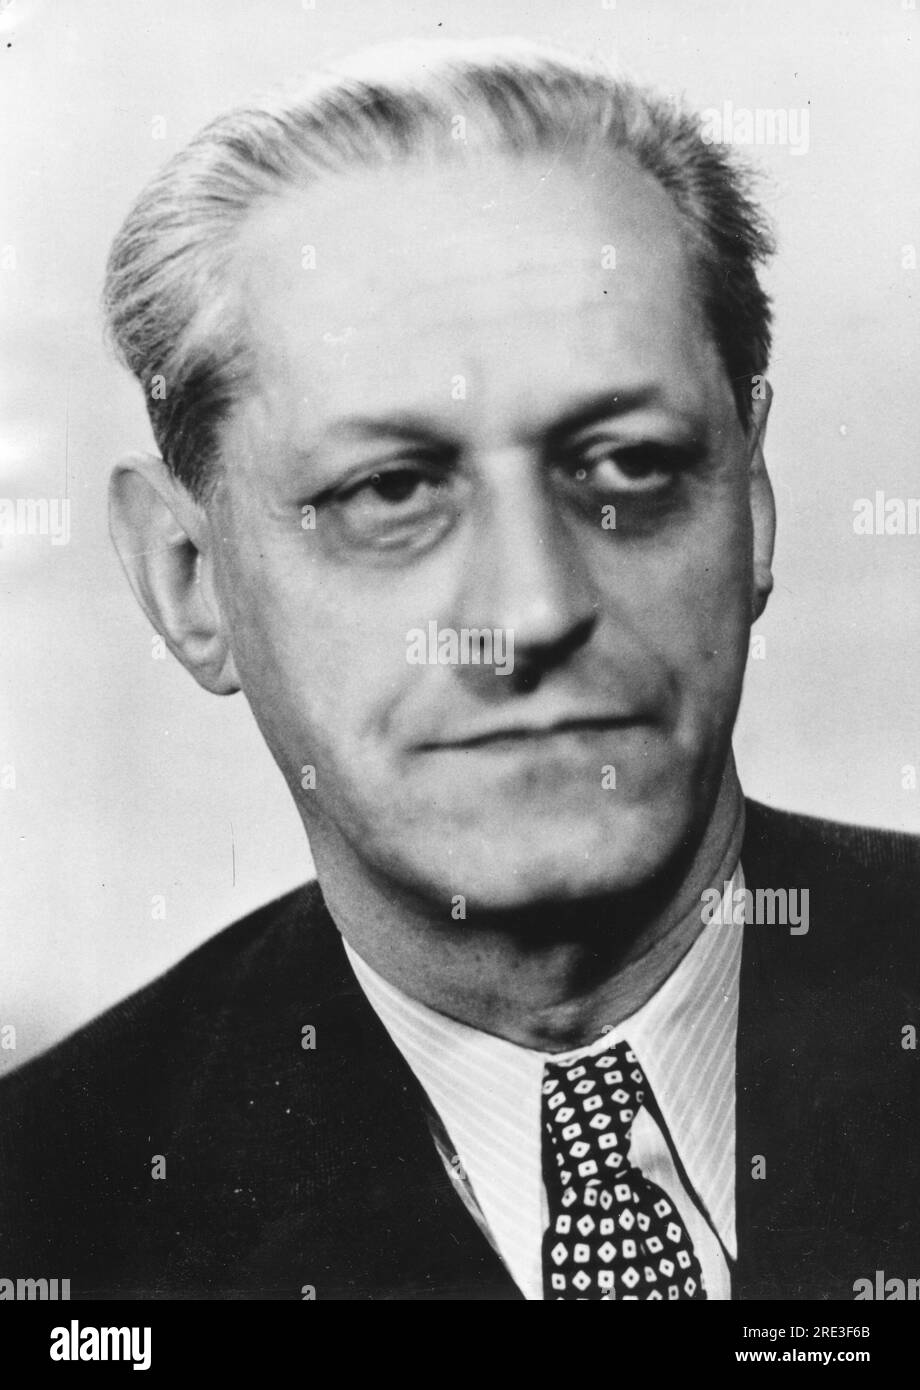 Wicha, Wladyslaw, 3.6.1904 - 13.12.1984, polnischer Politiker (PZPR), ADDITIONAL-RIGHTS-CLEARANCE-INFO-NOT-AVAILABLE Stockfoto